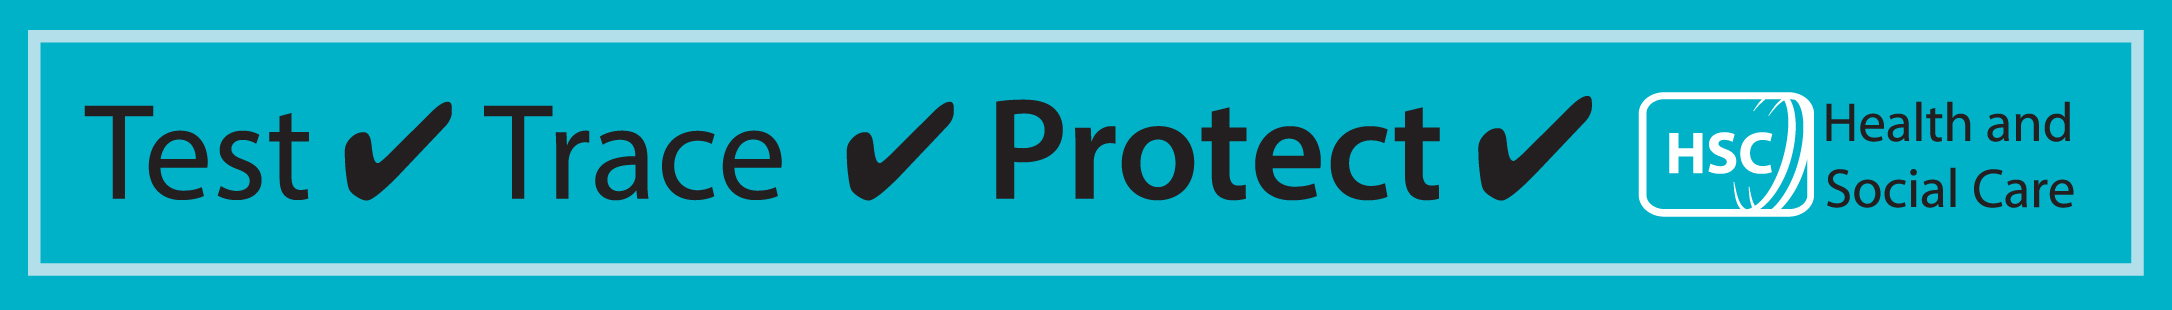 test trace protect logo